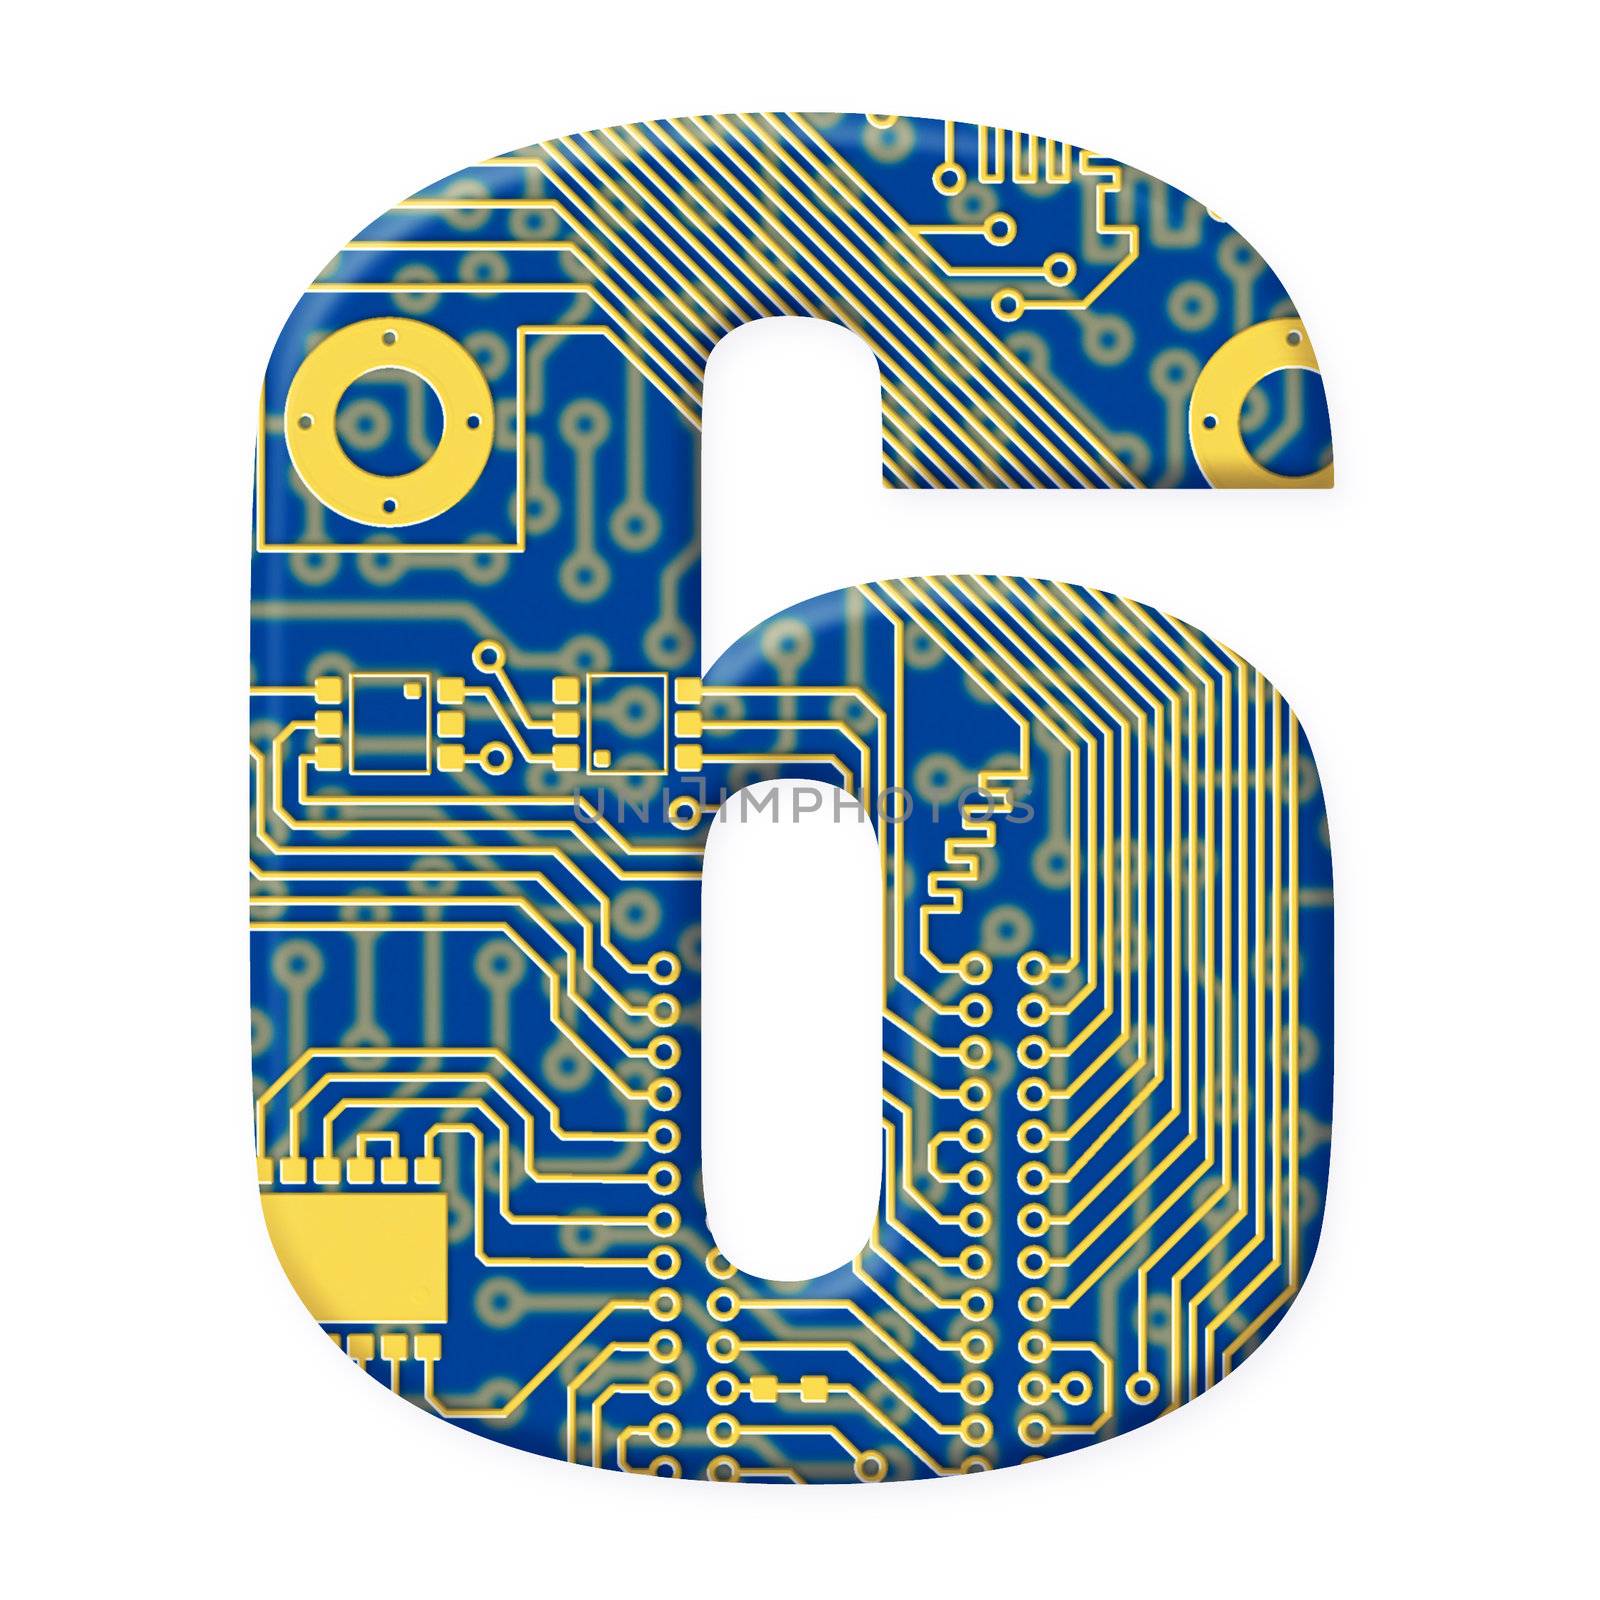 One digit from the electronic technology circuit board alphabet on a white background - 6